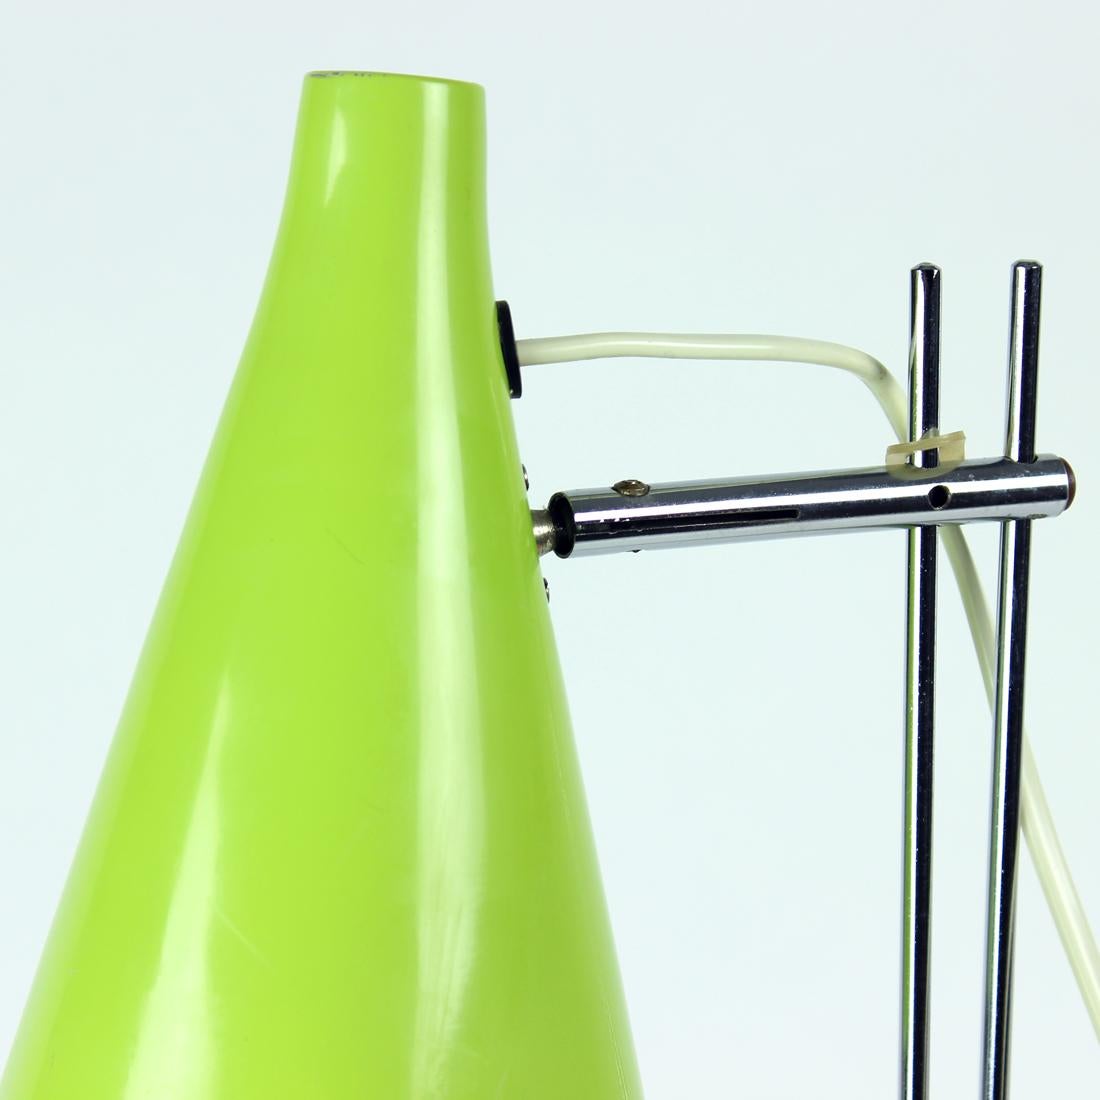 Mid-20th Century Green Metal Table Lamp by Lidokov, Czechoslovakia 1960s For Sale